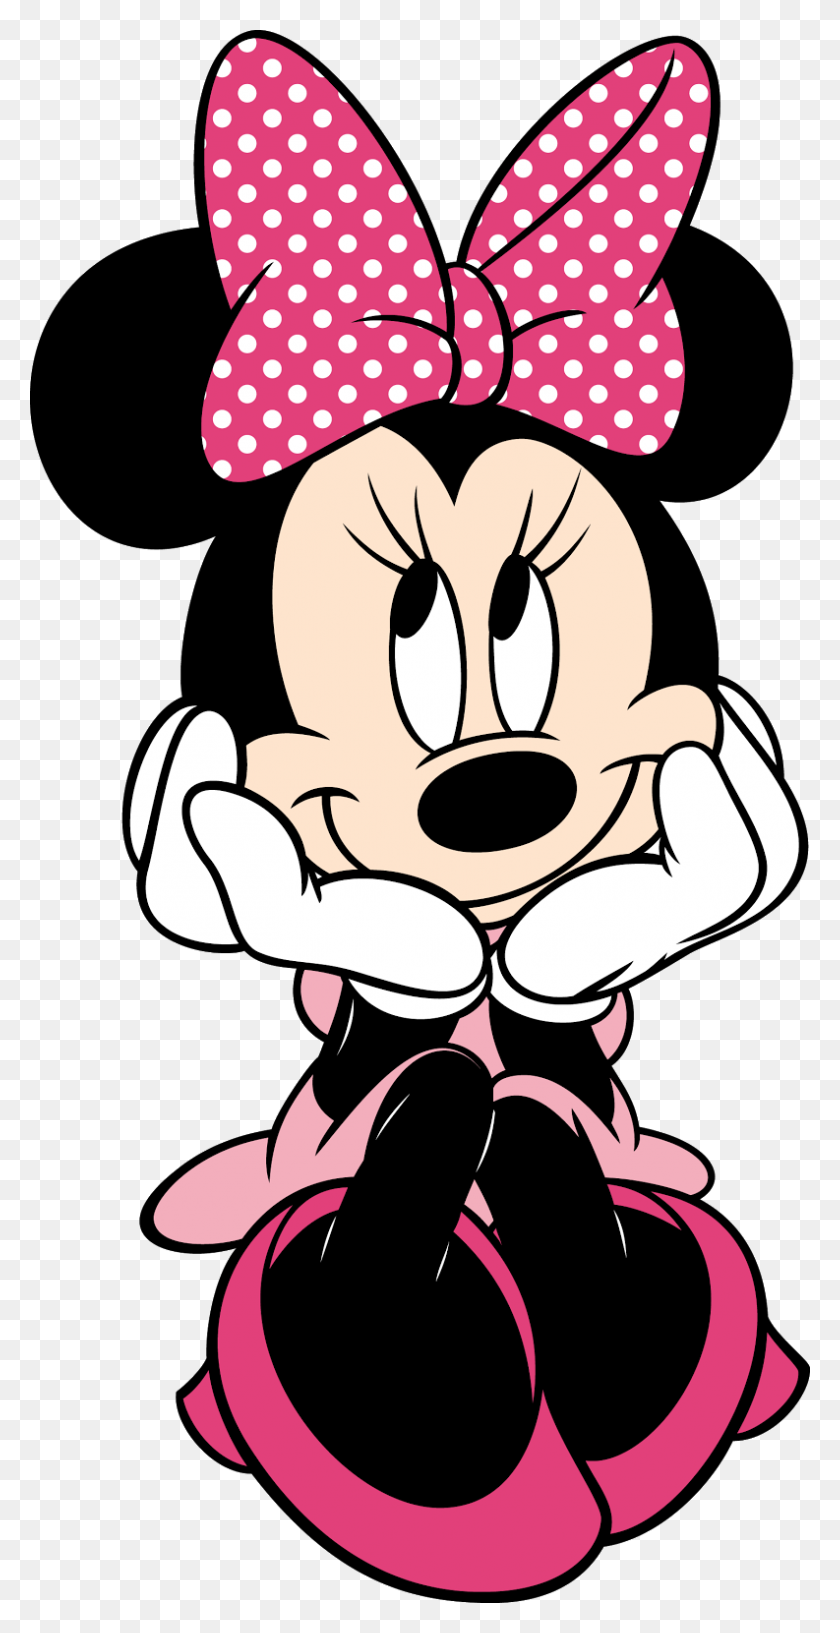 793x1600 Baby Minnie Mouse Clip Art Free Clipart Images Dekoracije - Smooch Clipart